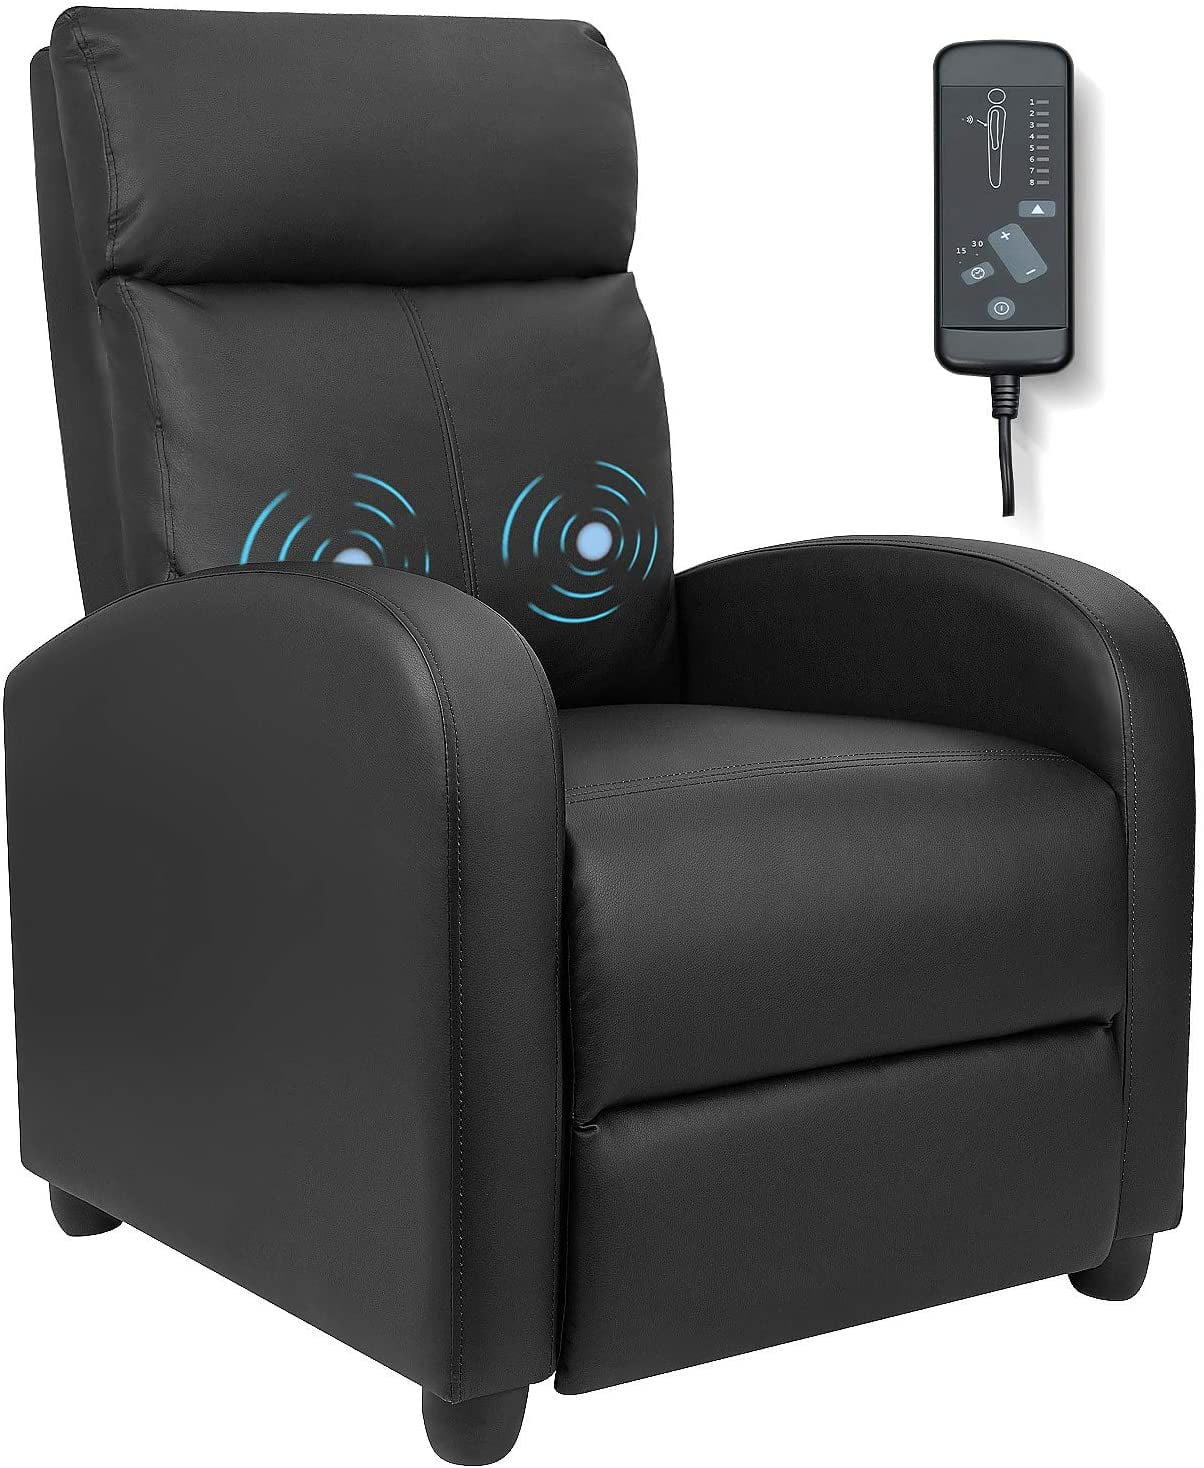 Vineego Home Theater Recliner With, Leather Theater Recliner